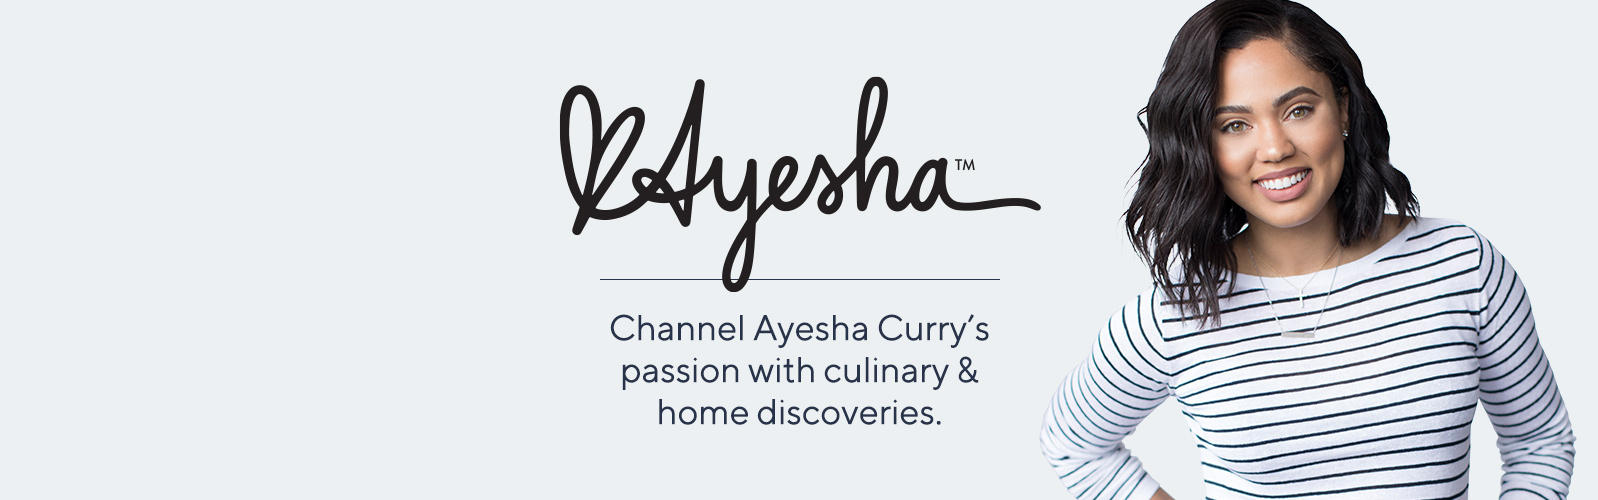 Channel Ayesha Curry's passion with culinary & home discoveries. 